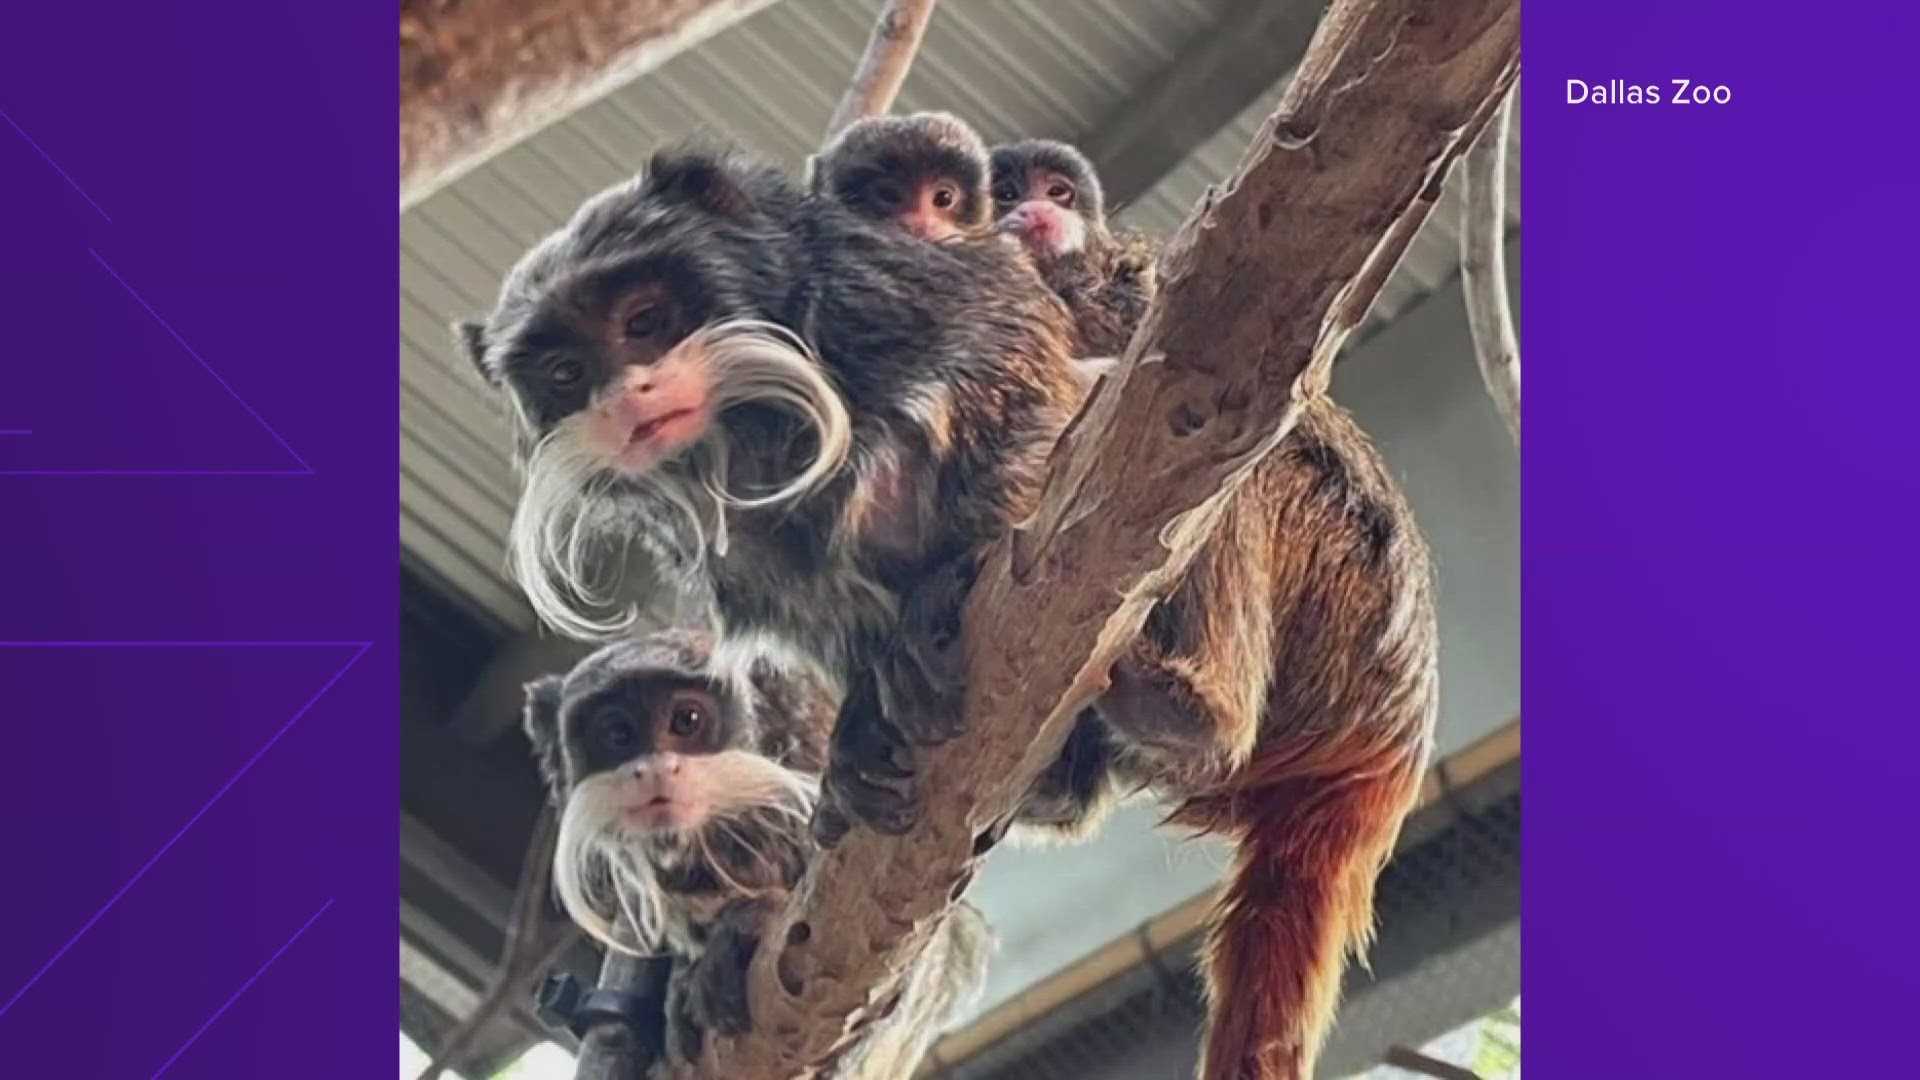 No, none of the monkeys in this growing family were the two that got stolen from the zoo earlier this year.